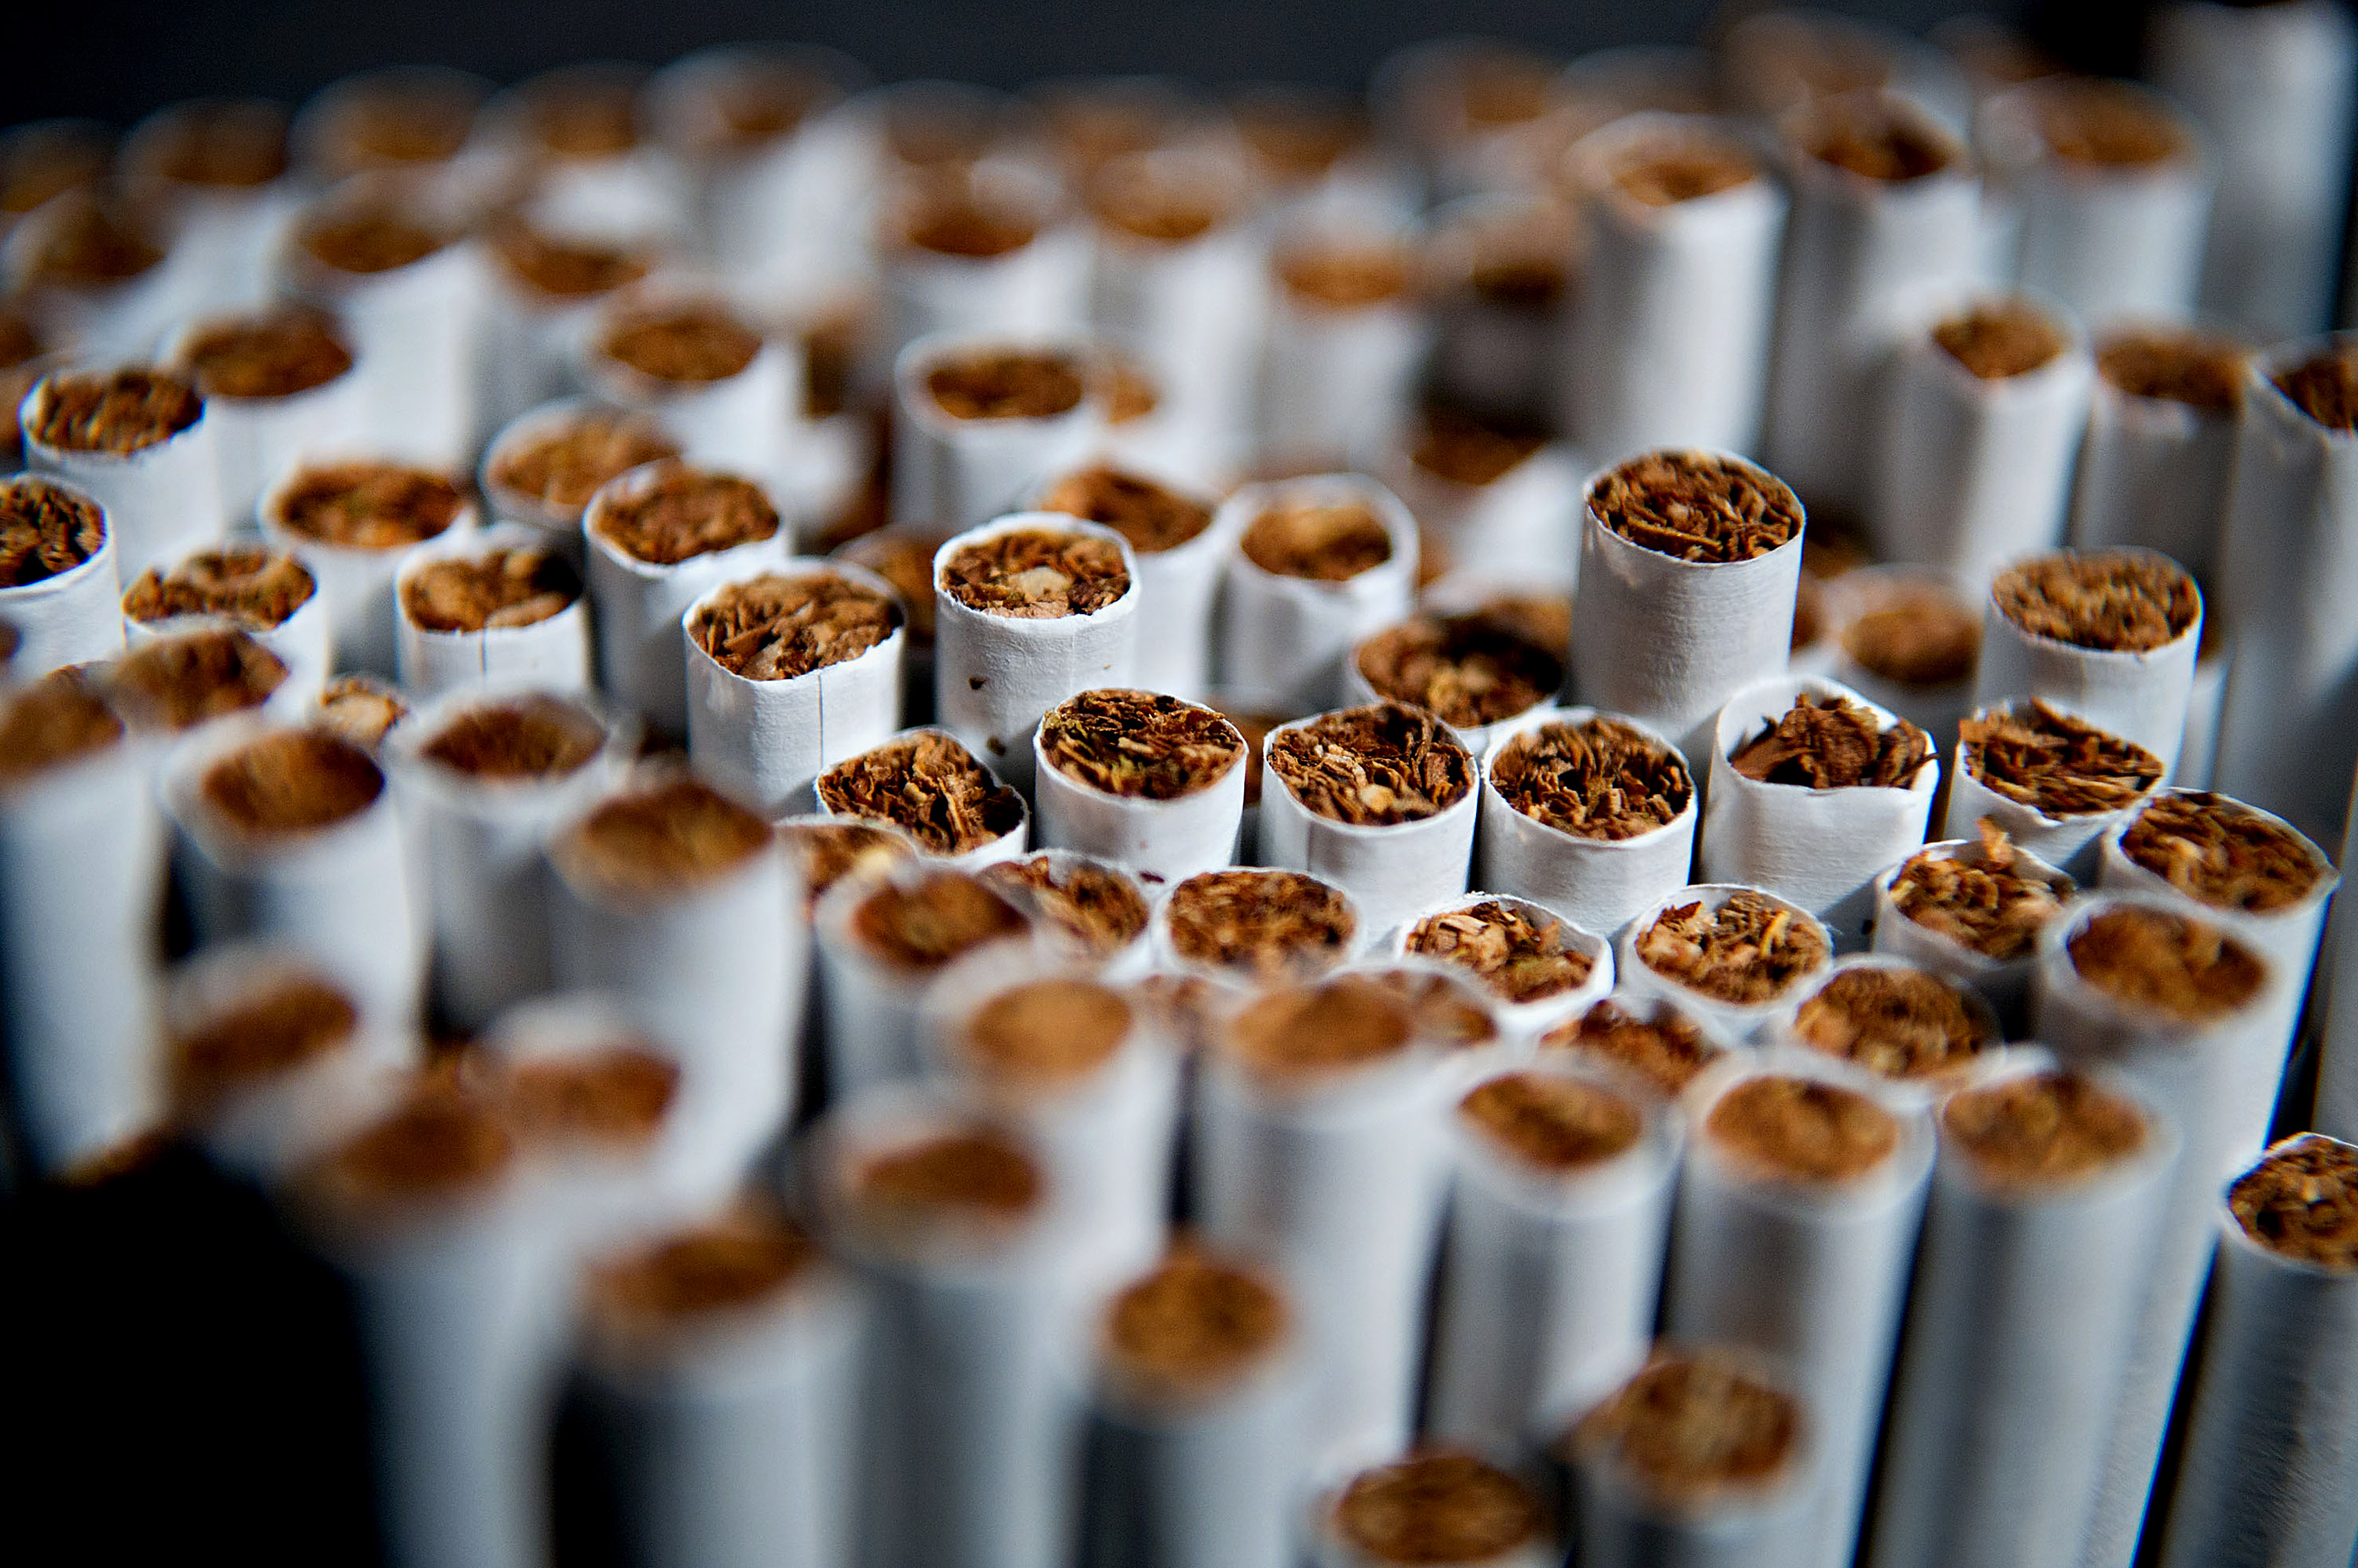 Several brands of cigarettes are arranged for a photograph in Tiskilwa, Illinois, U.S., on April 17, 2012. 